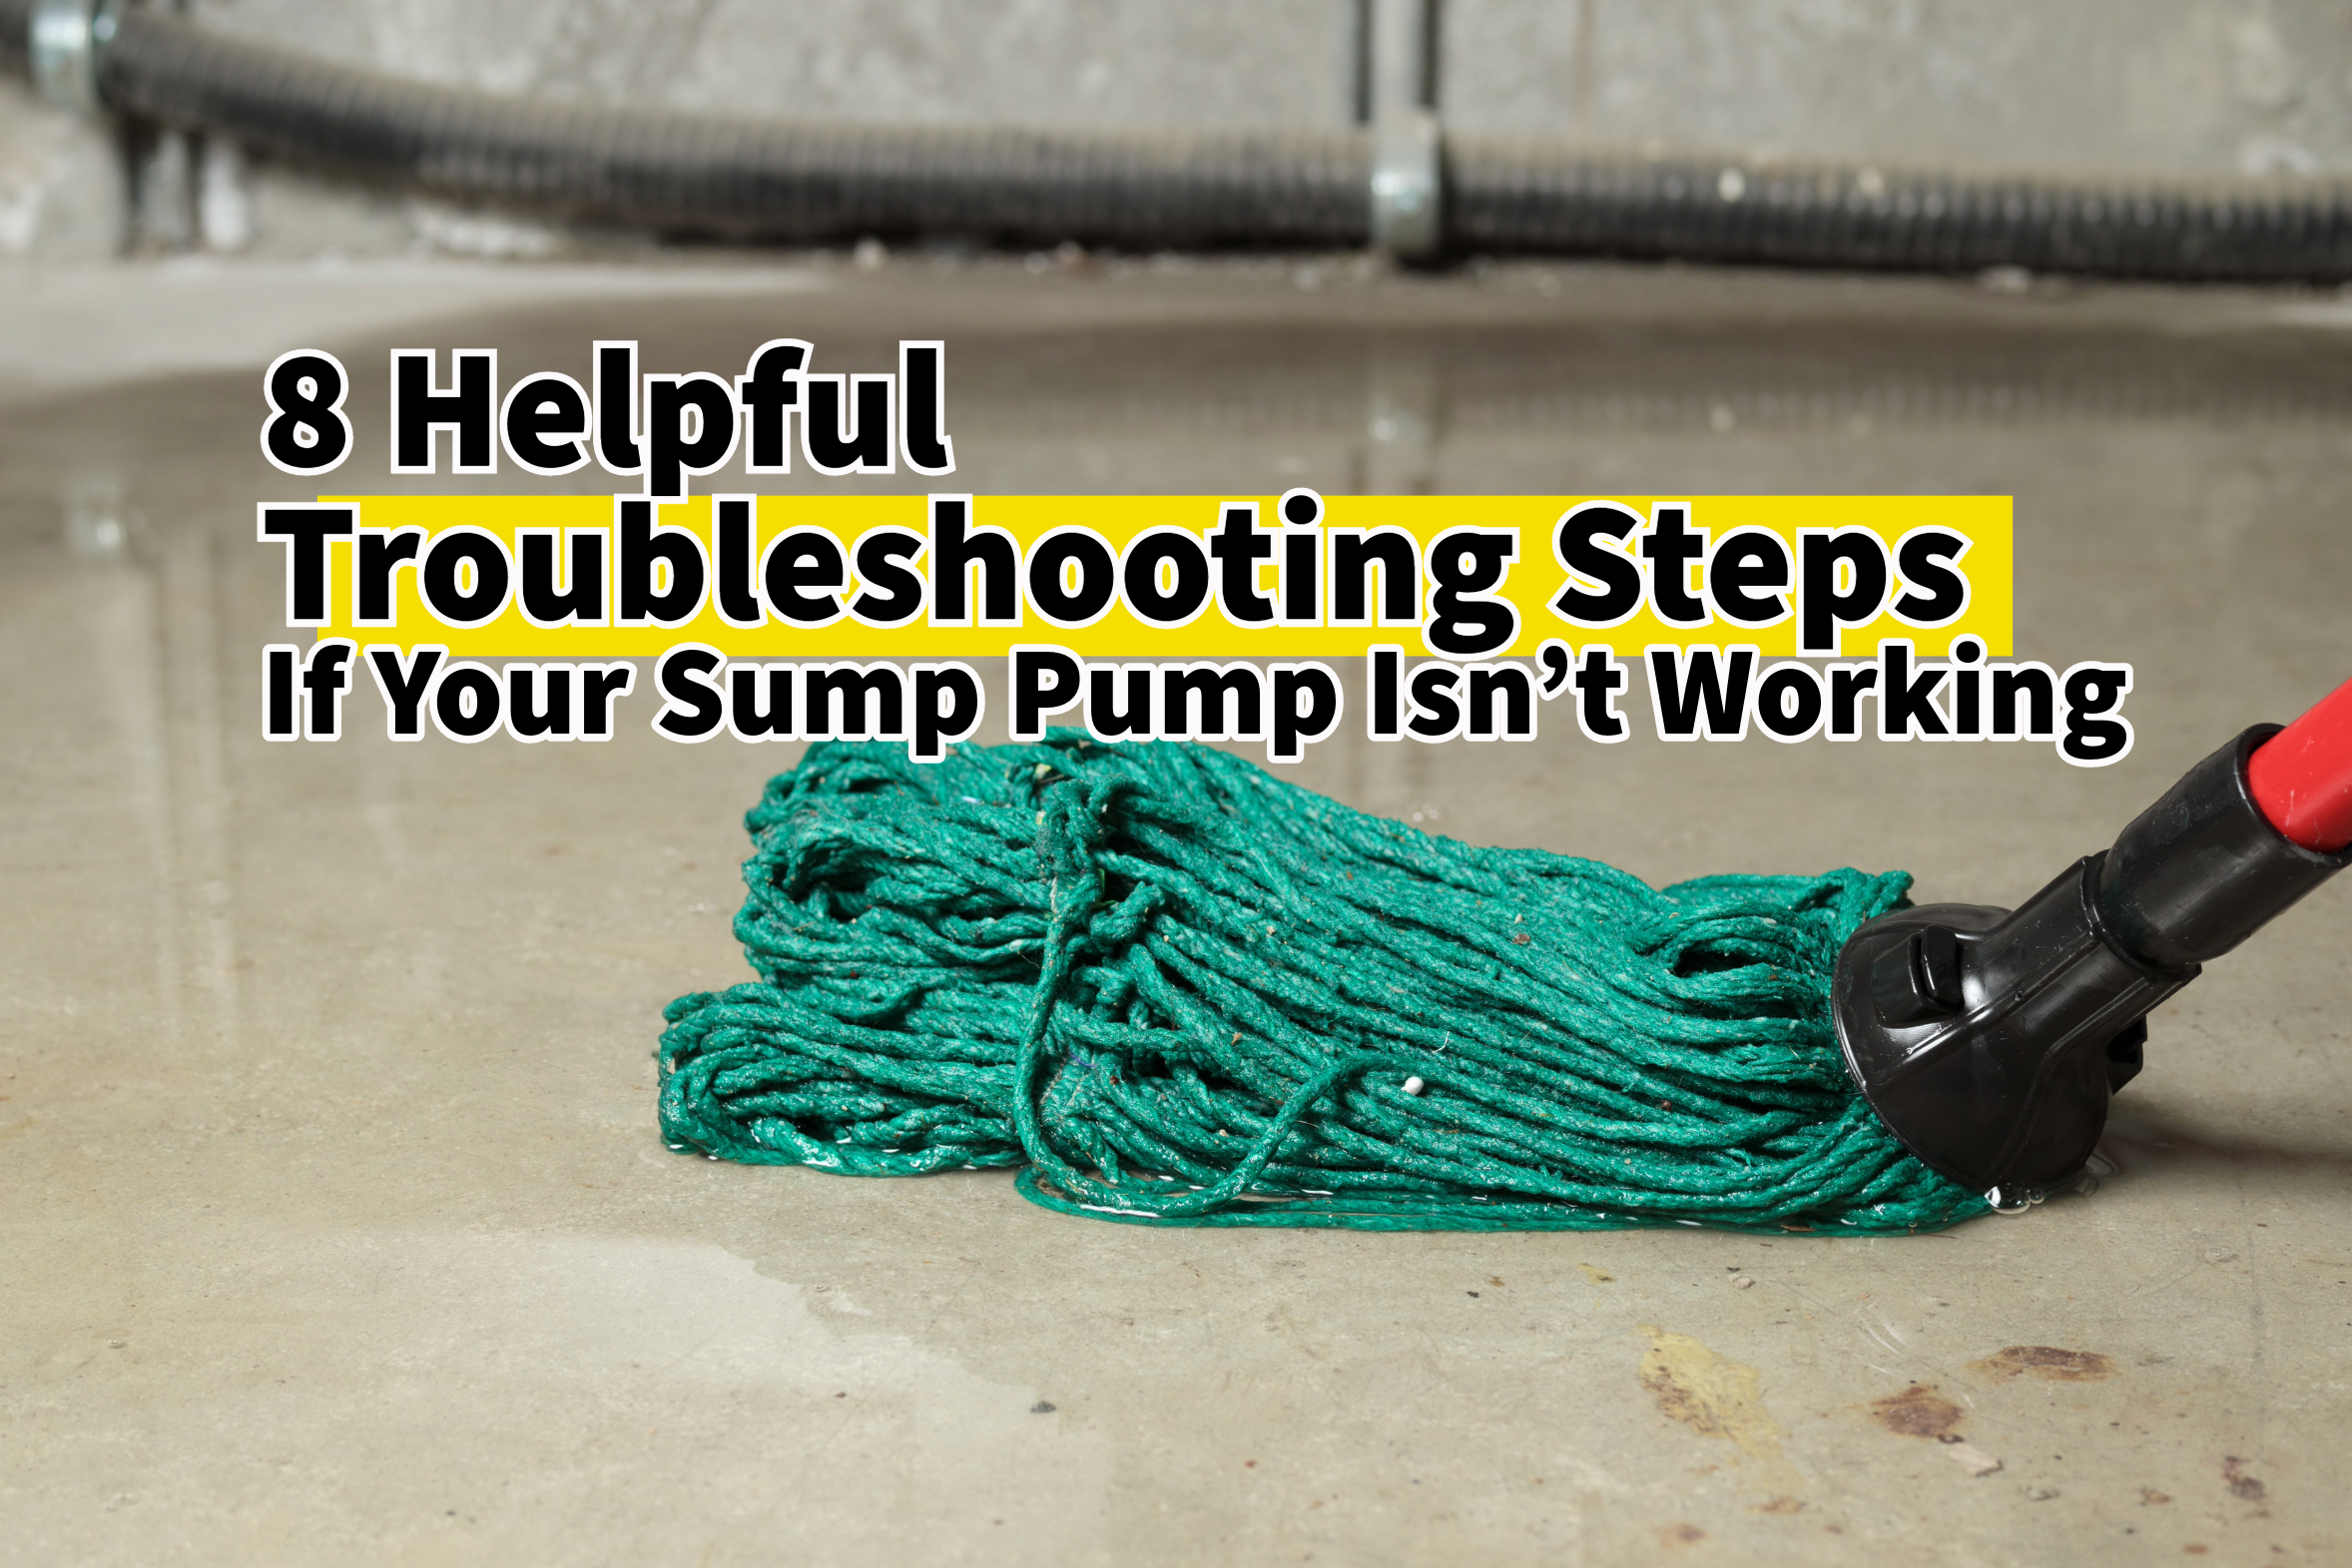 A homeowner’s guide to troubleshooting a malfunctioning sump pump. Plumbing and drain services in Upper Arlington, Ohio.